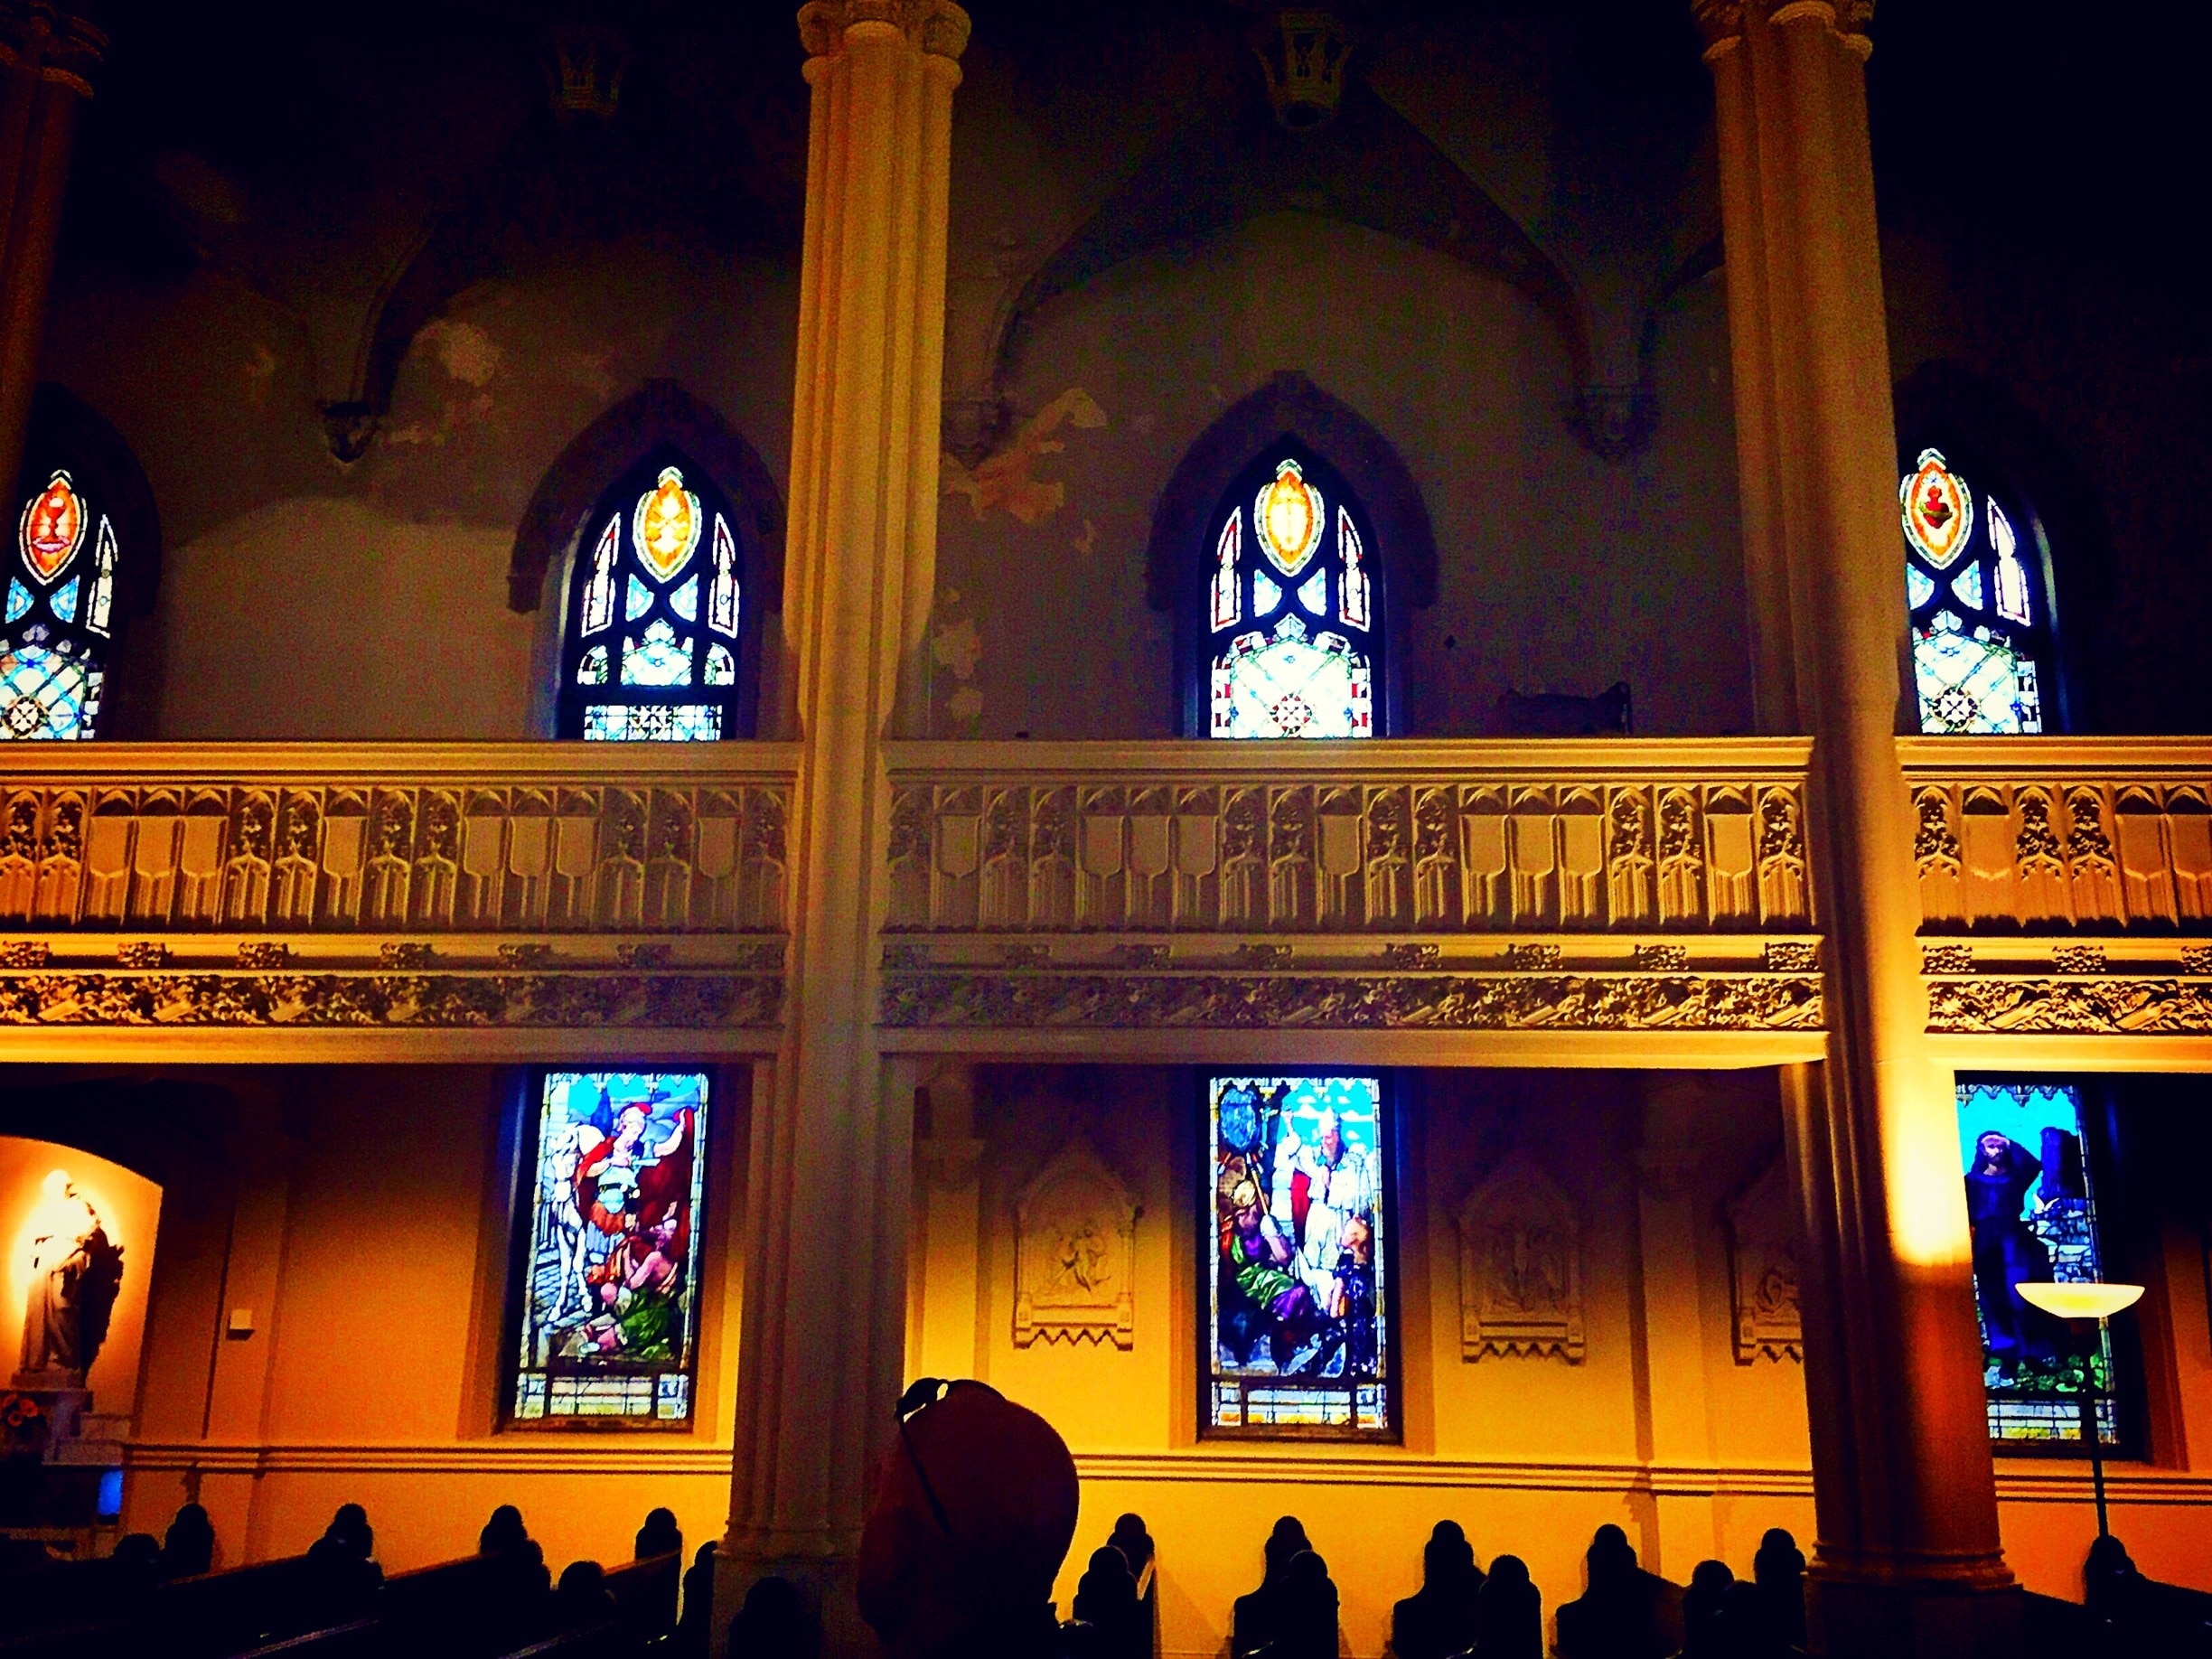 The beautiful stained glass windows inside the cathedral #bestof5